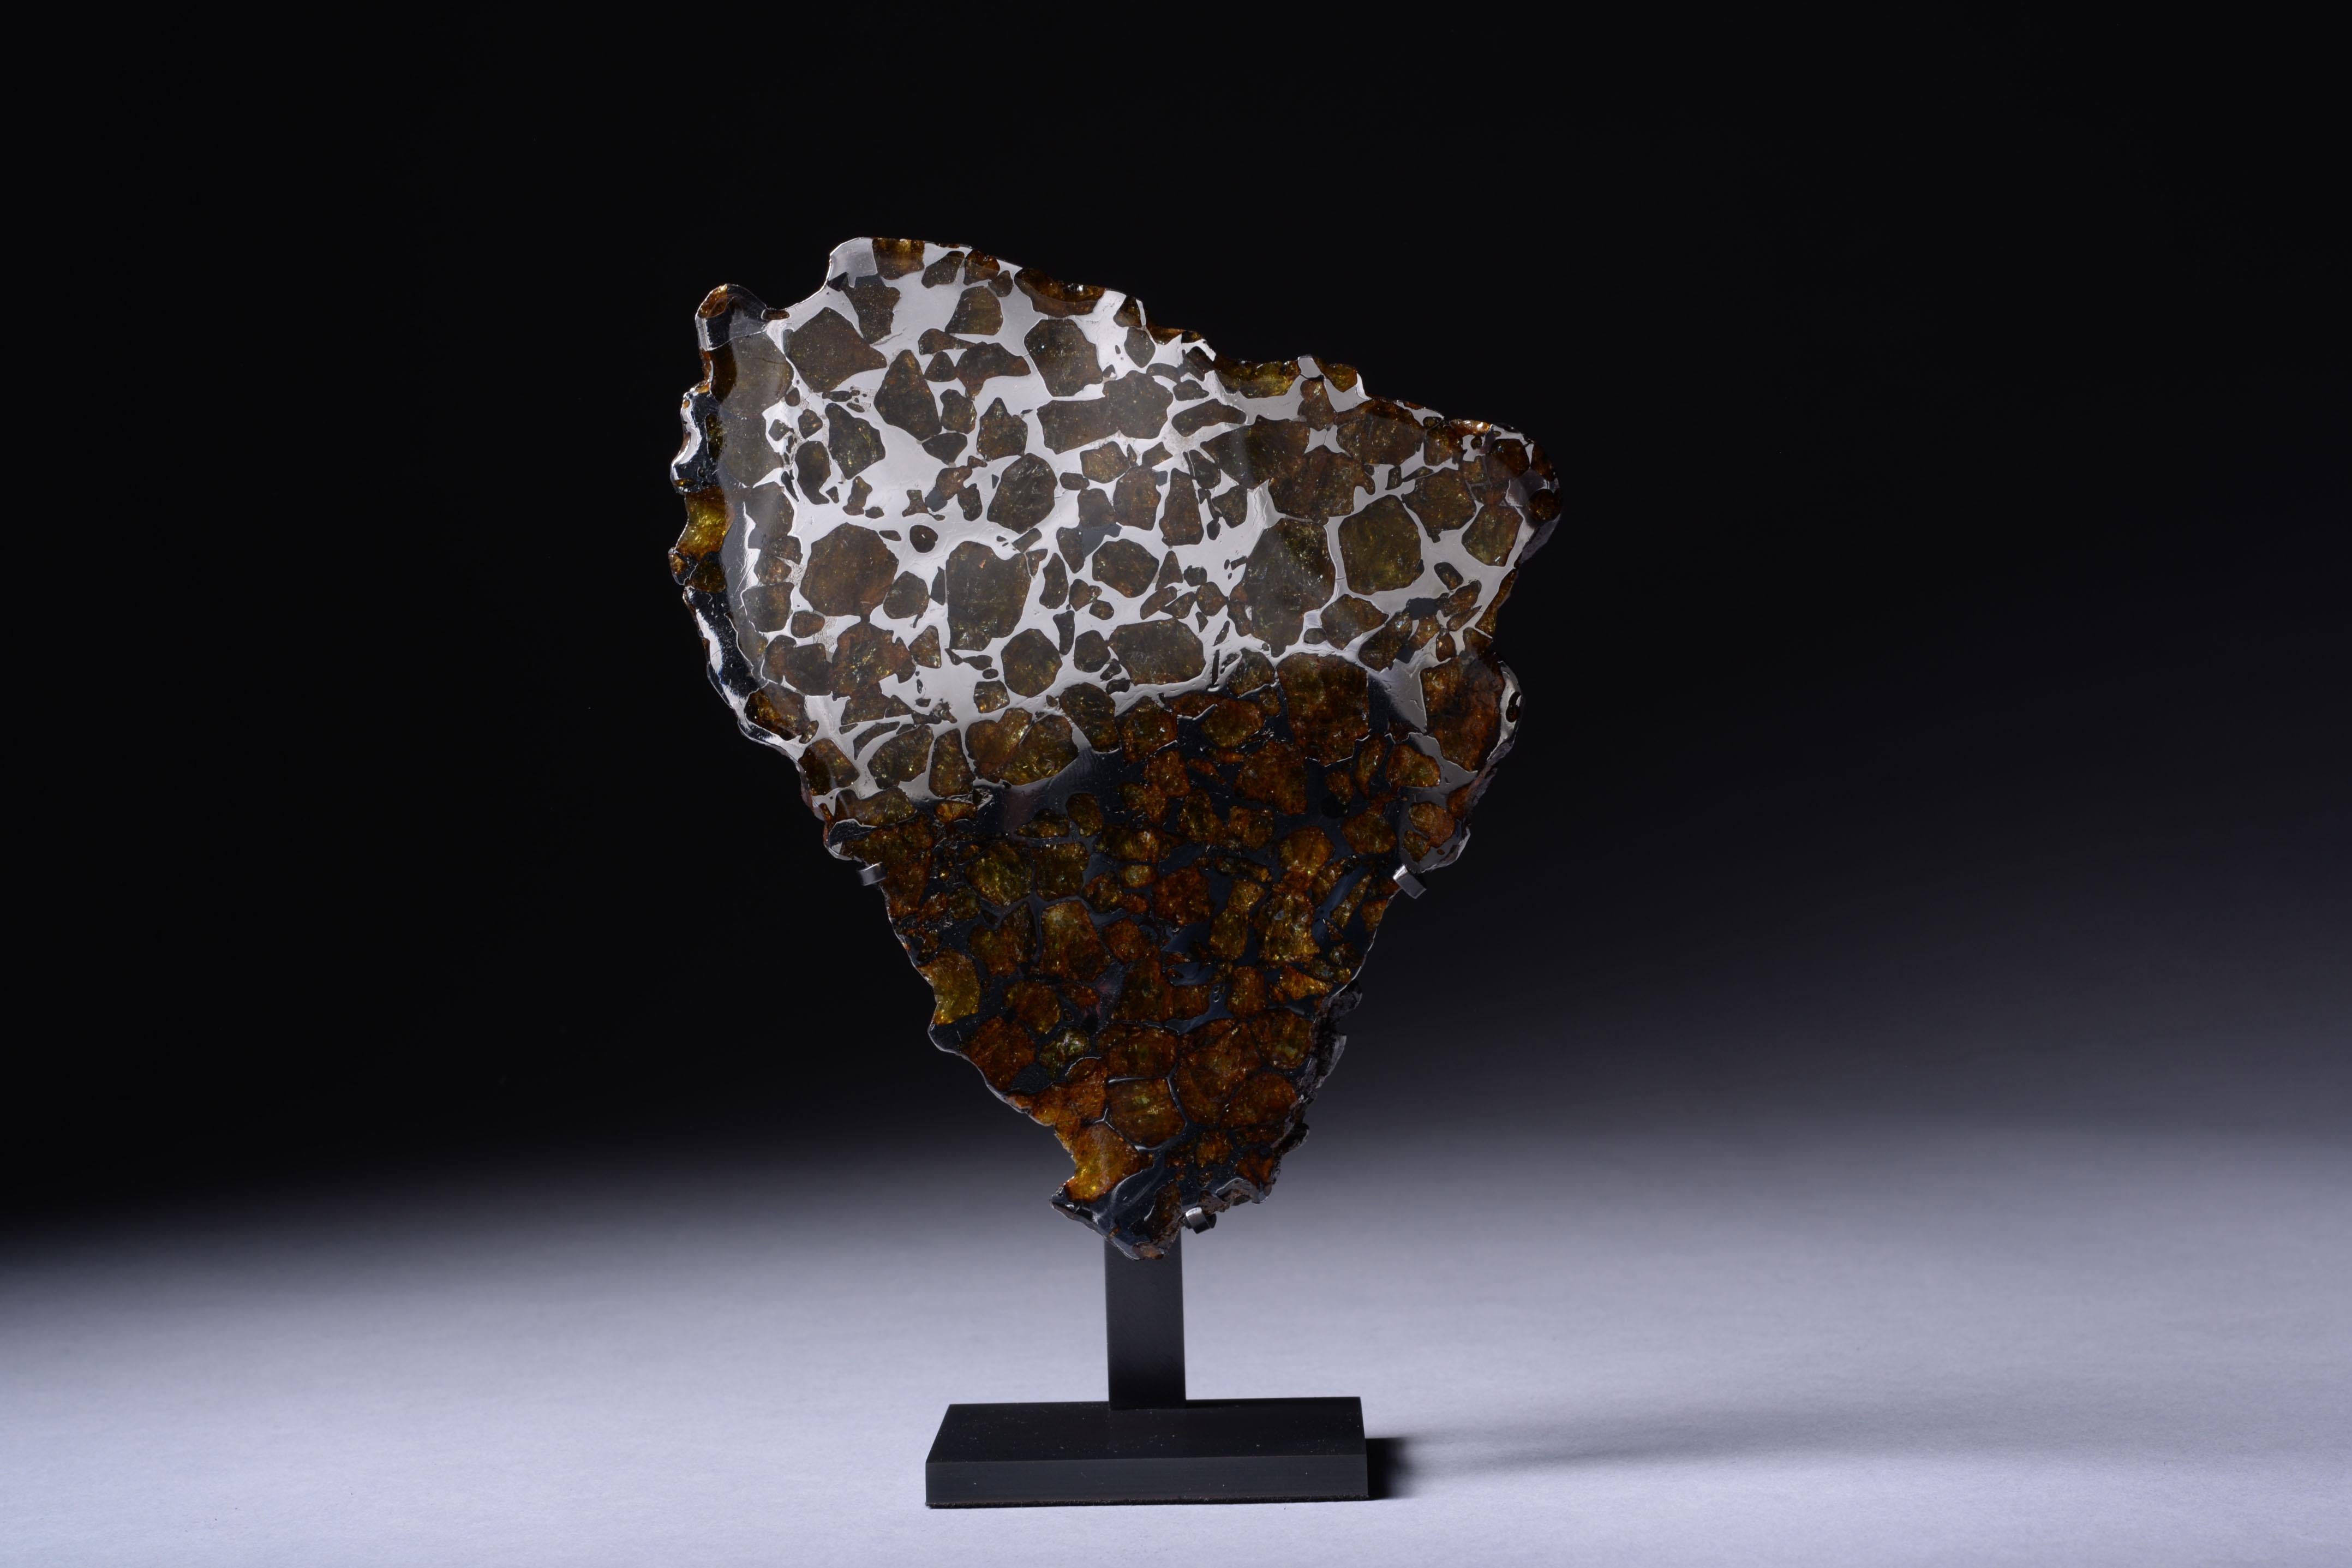 Imilac Meteorite End-Cut
circa 4.5 Billion y/o
Measures: 10 x 13 x 1 cm

“This interior section of the Imilac pallasite shows a large range of olivine grain sizes there are coarse grains, grain clusters and fine-grained, crushed olivine debris.